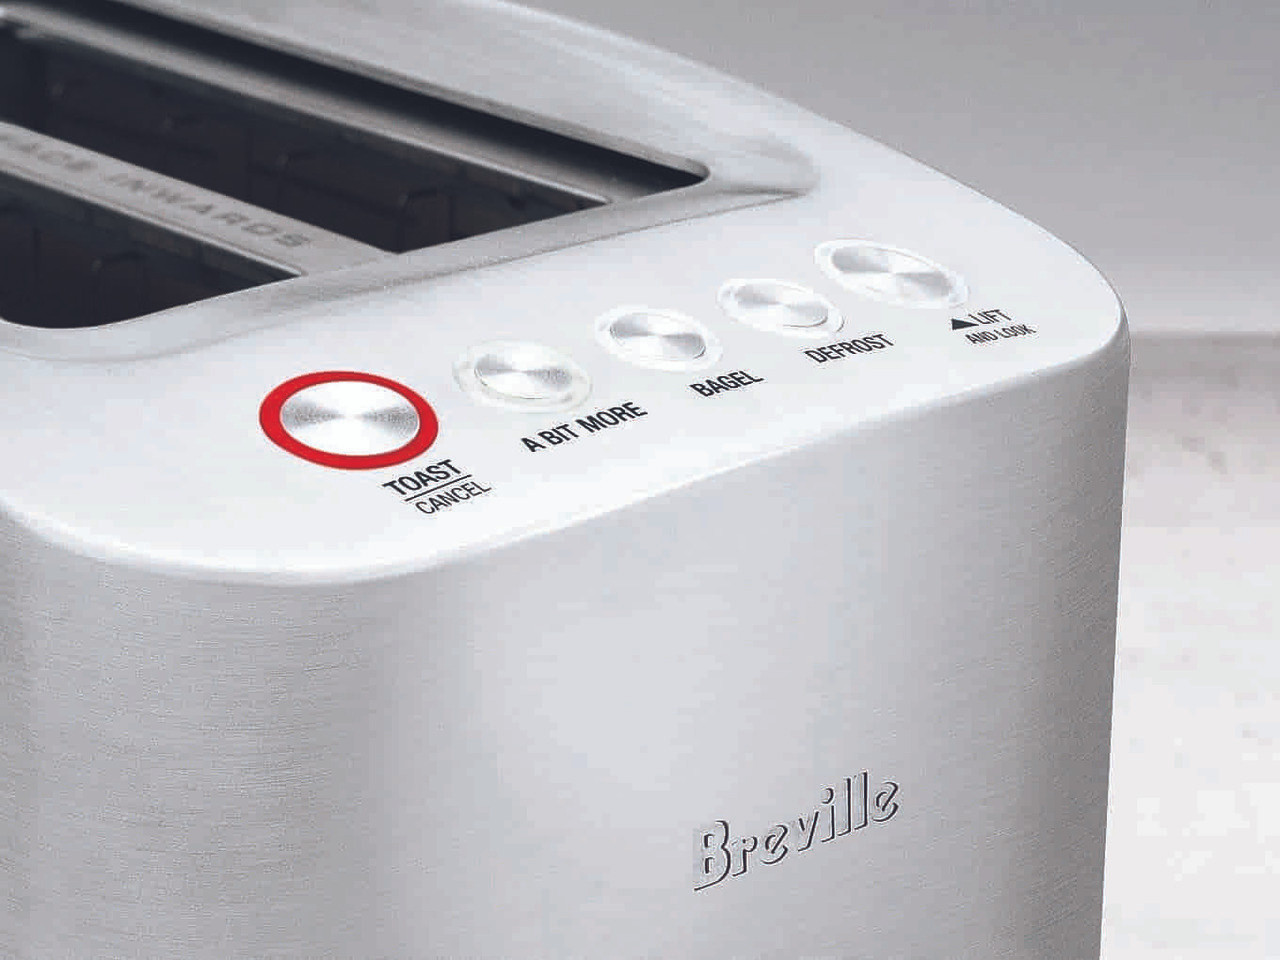 https://cdn11.bigcommerce.com/s-hccytny0od/images/stencil/1280x1280/products/915/2104/breville-2-slice-smart-toaster-control-panel__05700.1585354554.jpg?c=2?imbypass=on